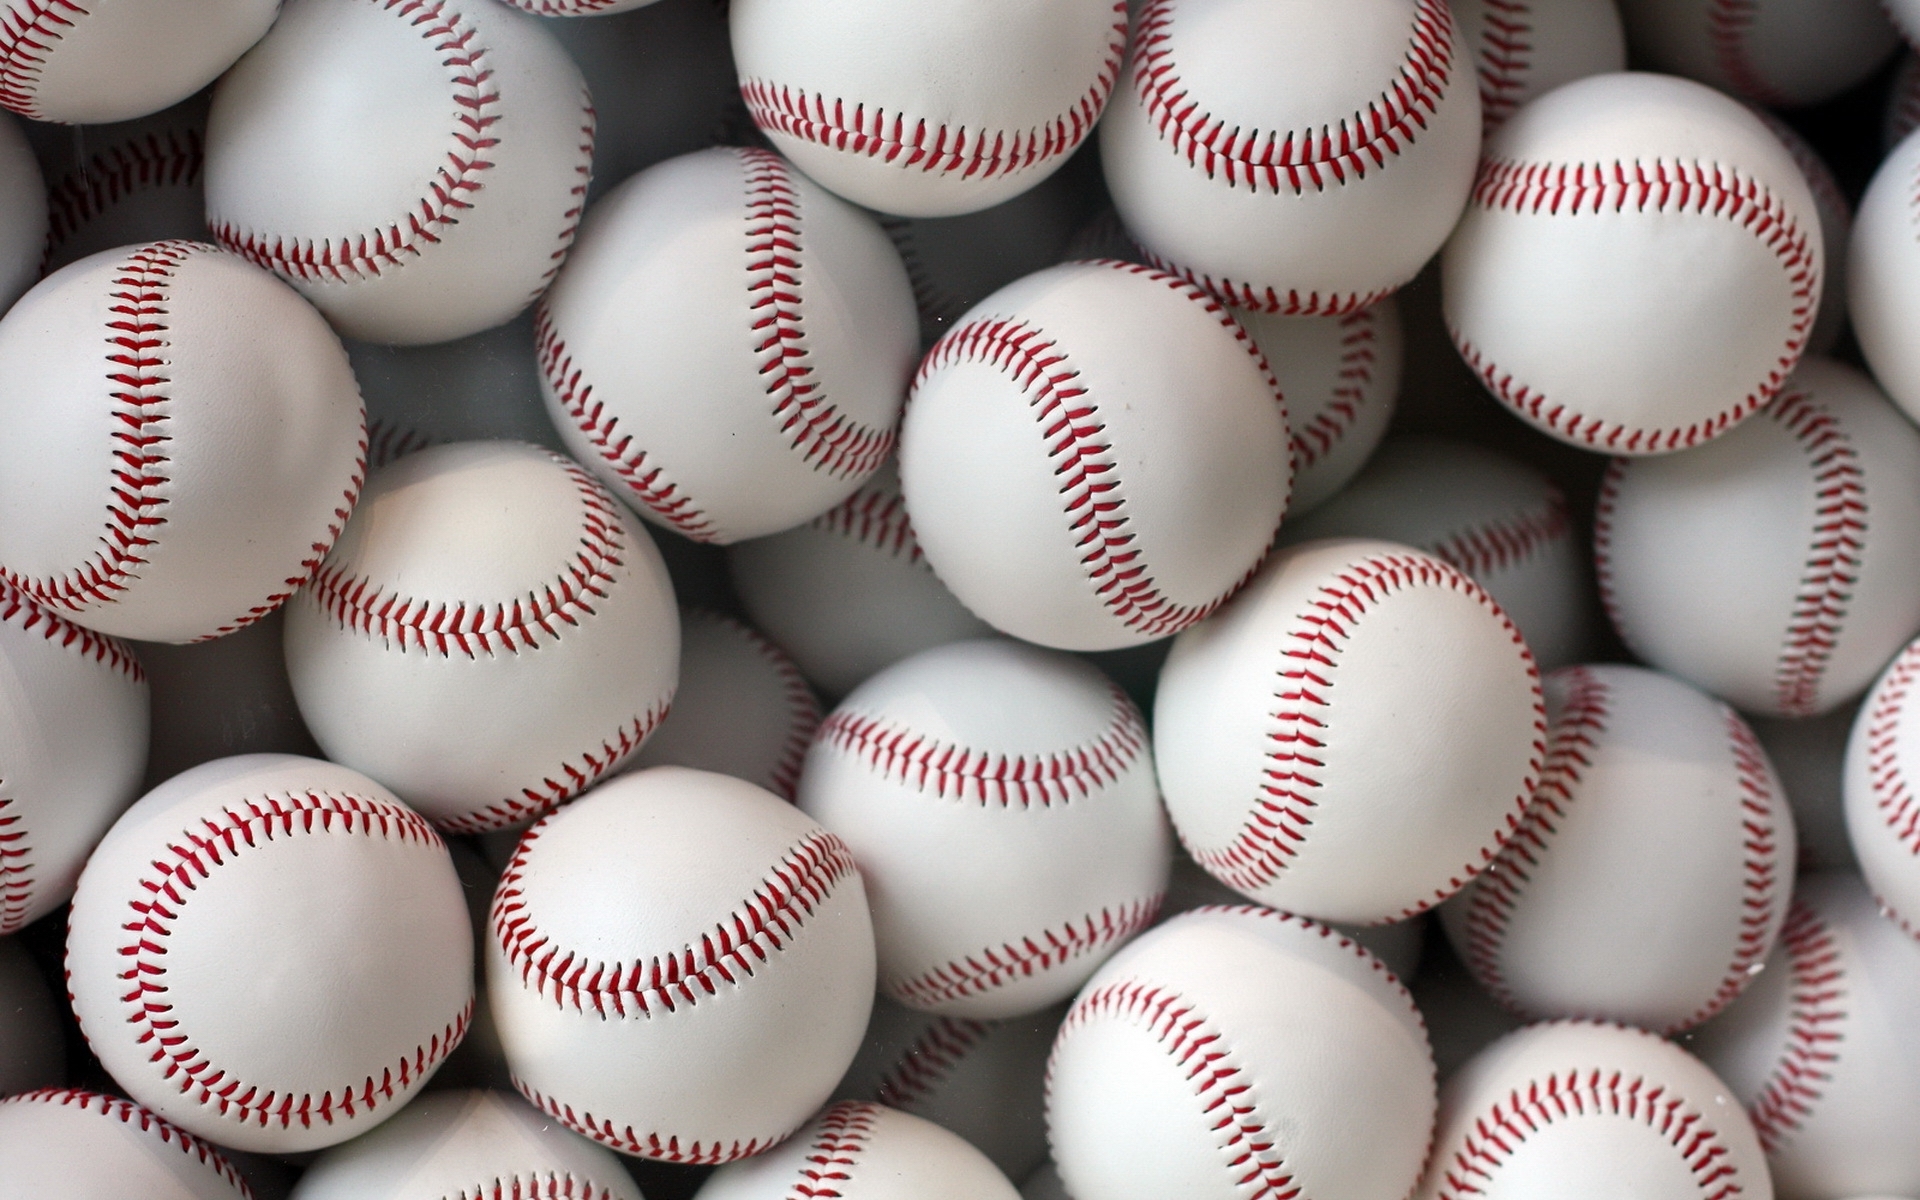 Pictures Of Baseball Hd, 1920x1200, 17/09/2013 - HD Wallpaper 